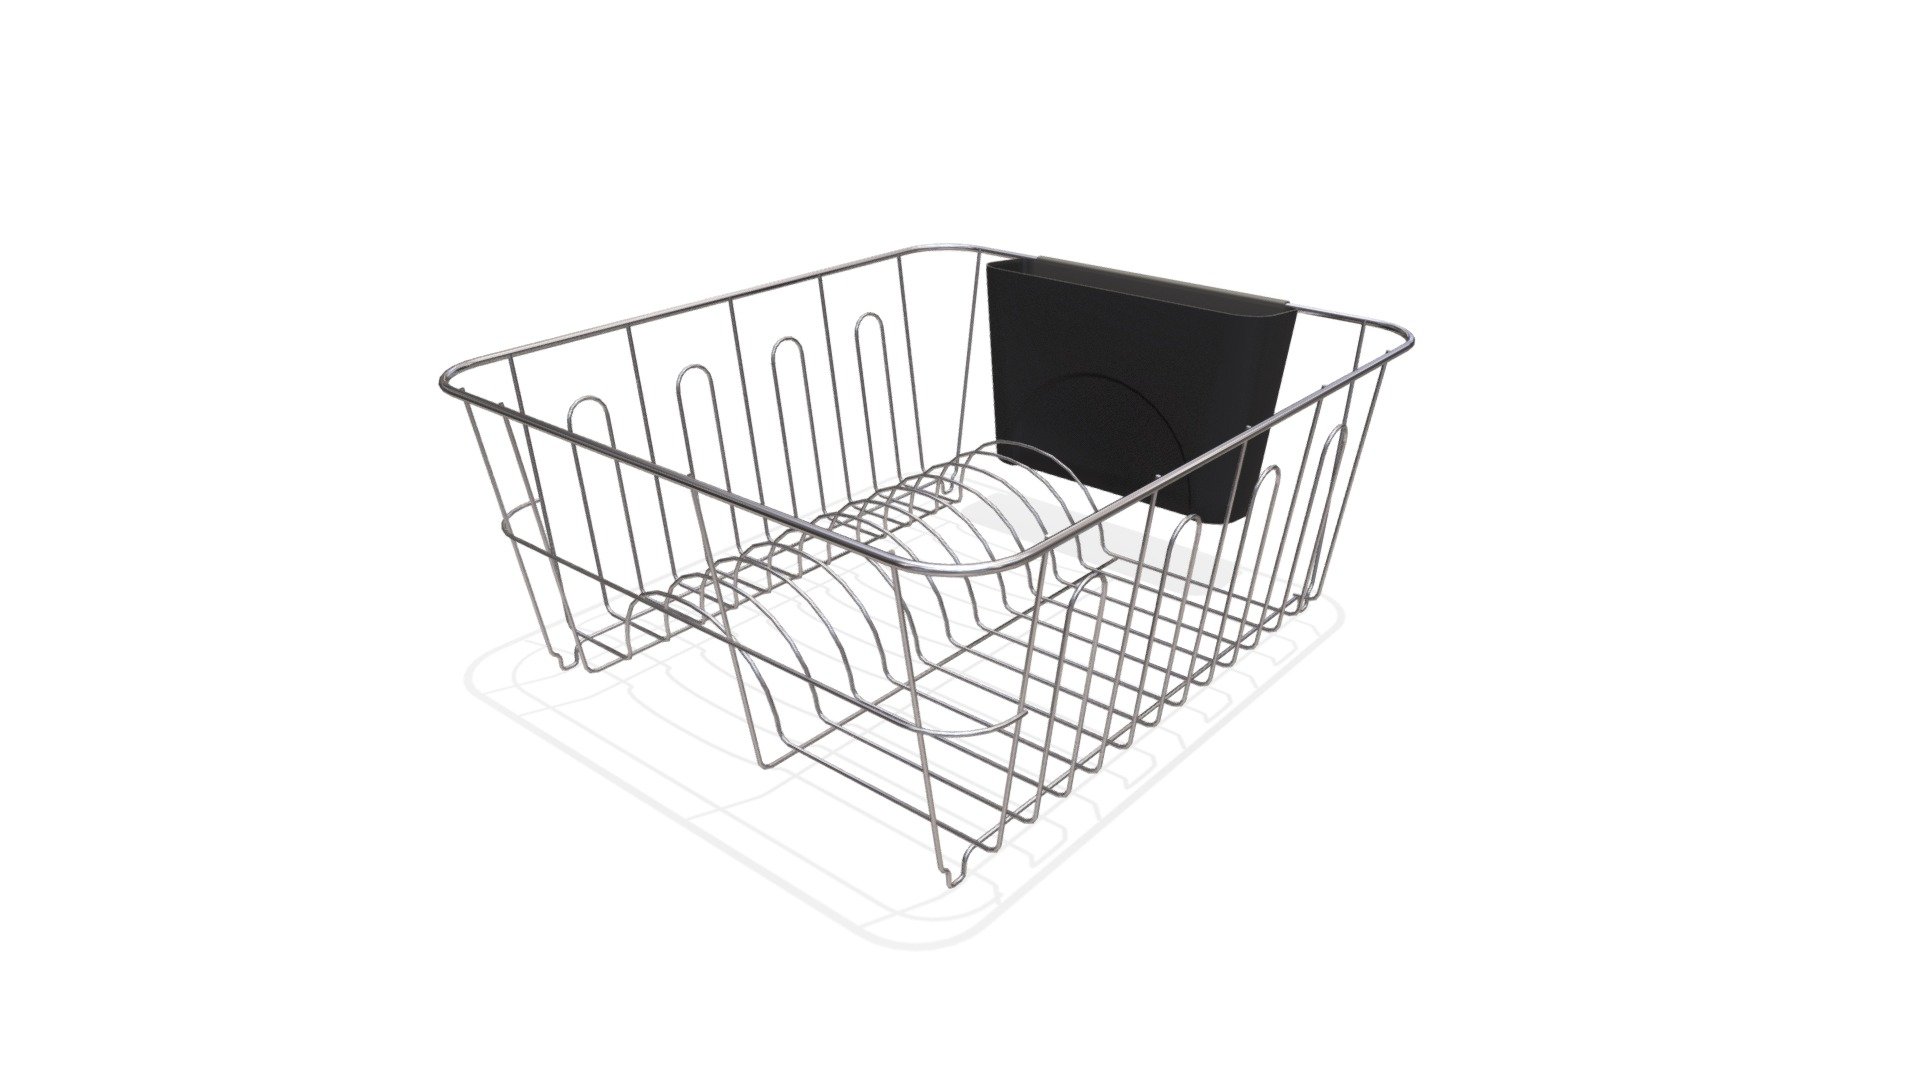 A simple dish rack suitable as a prop for kitchen scenes. Comes with a platic container to hold cutlery.

The two materials (metal and plastic) are simple and do not include textures 3d model